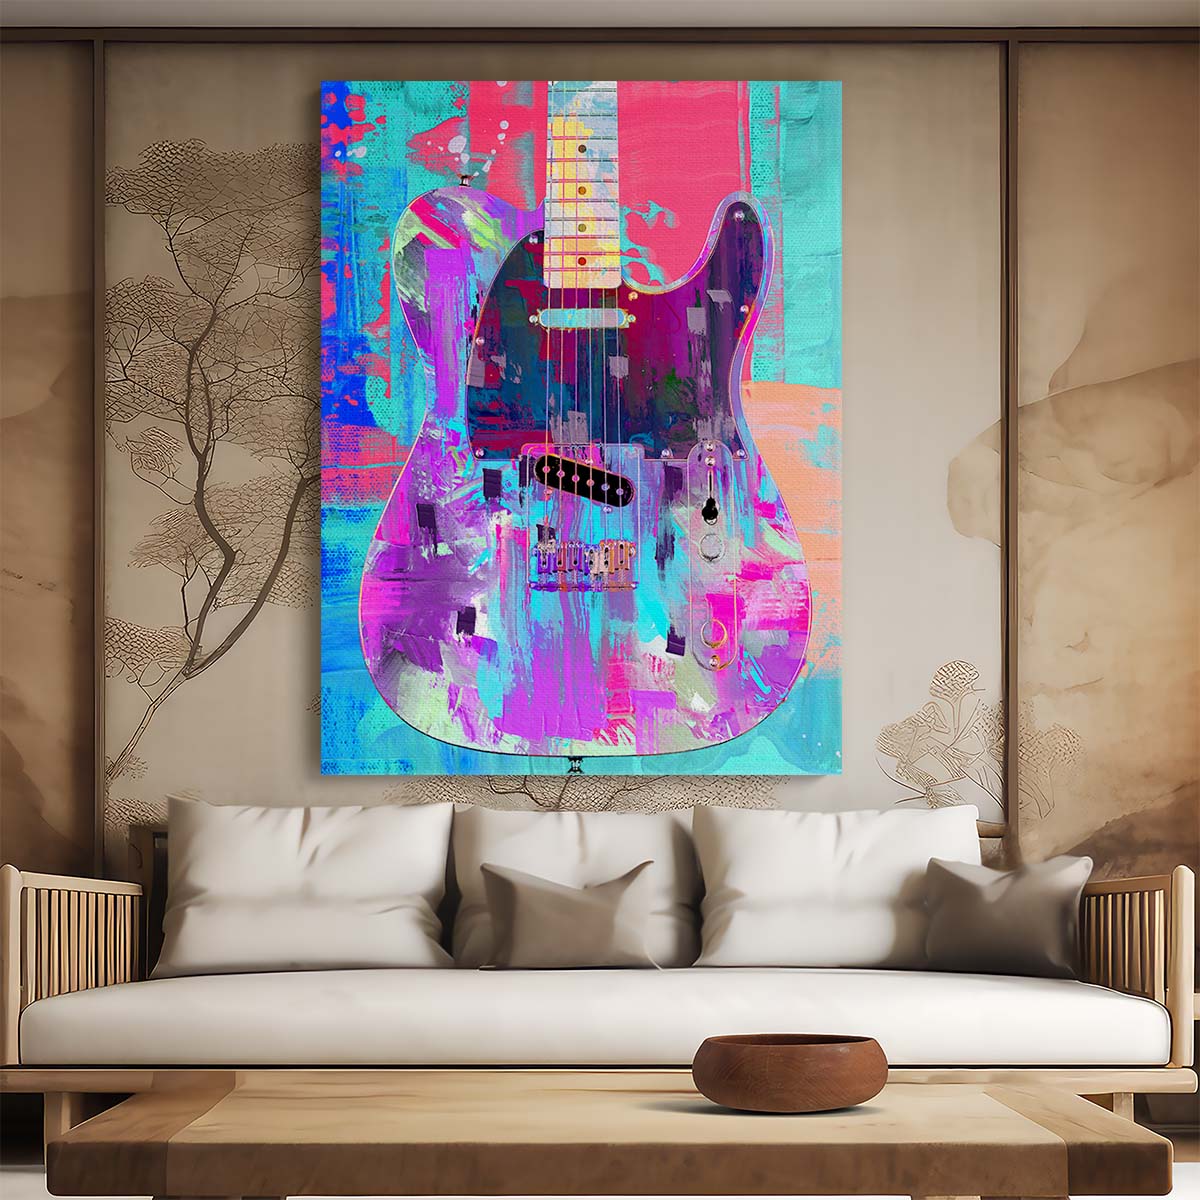 Painted Telecaster Guitar Wall Art by Luxuriance Designs. Made in USA.